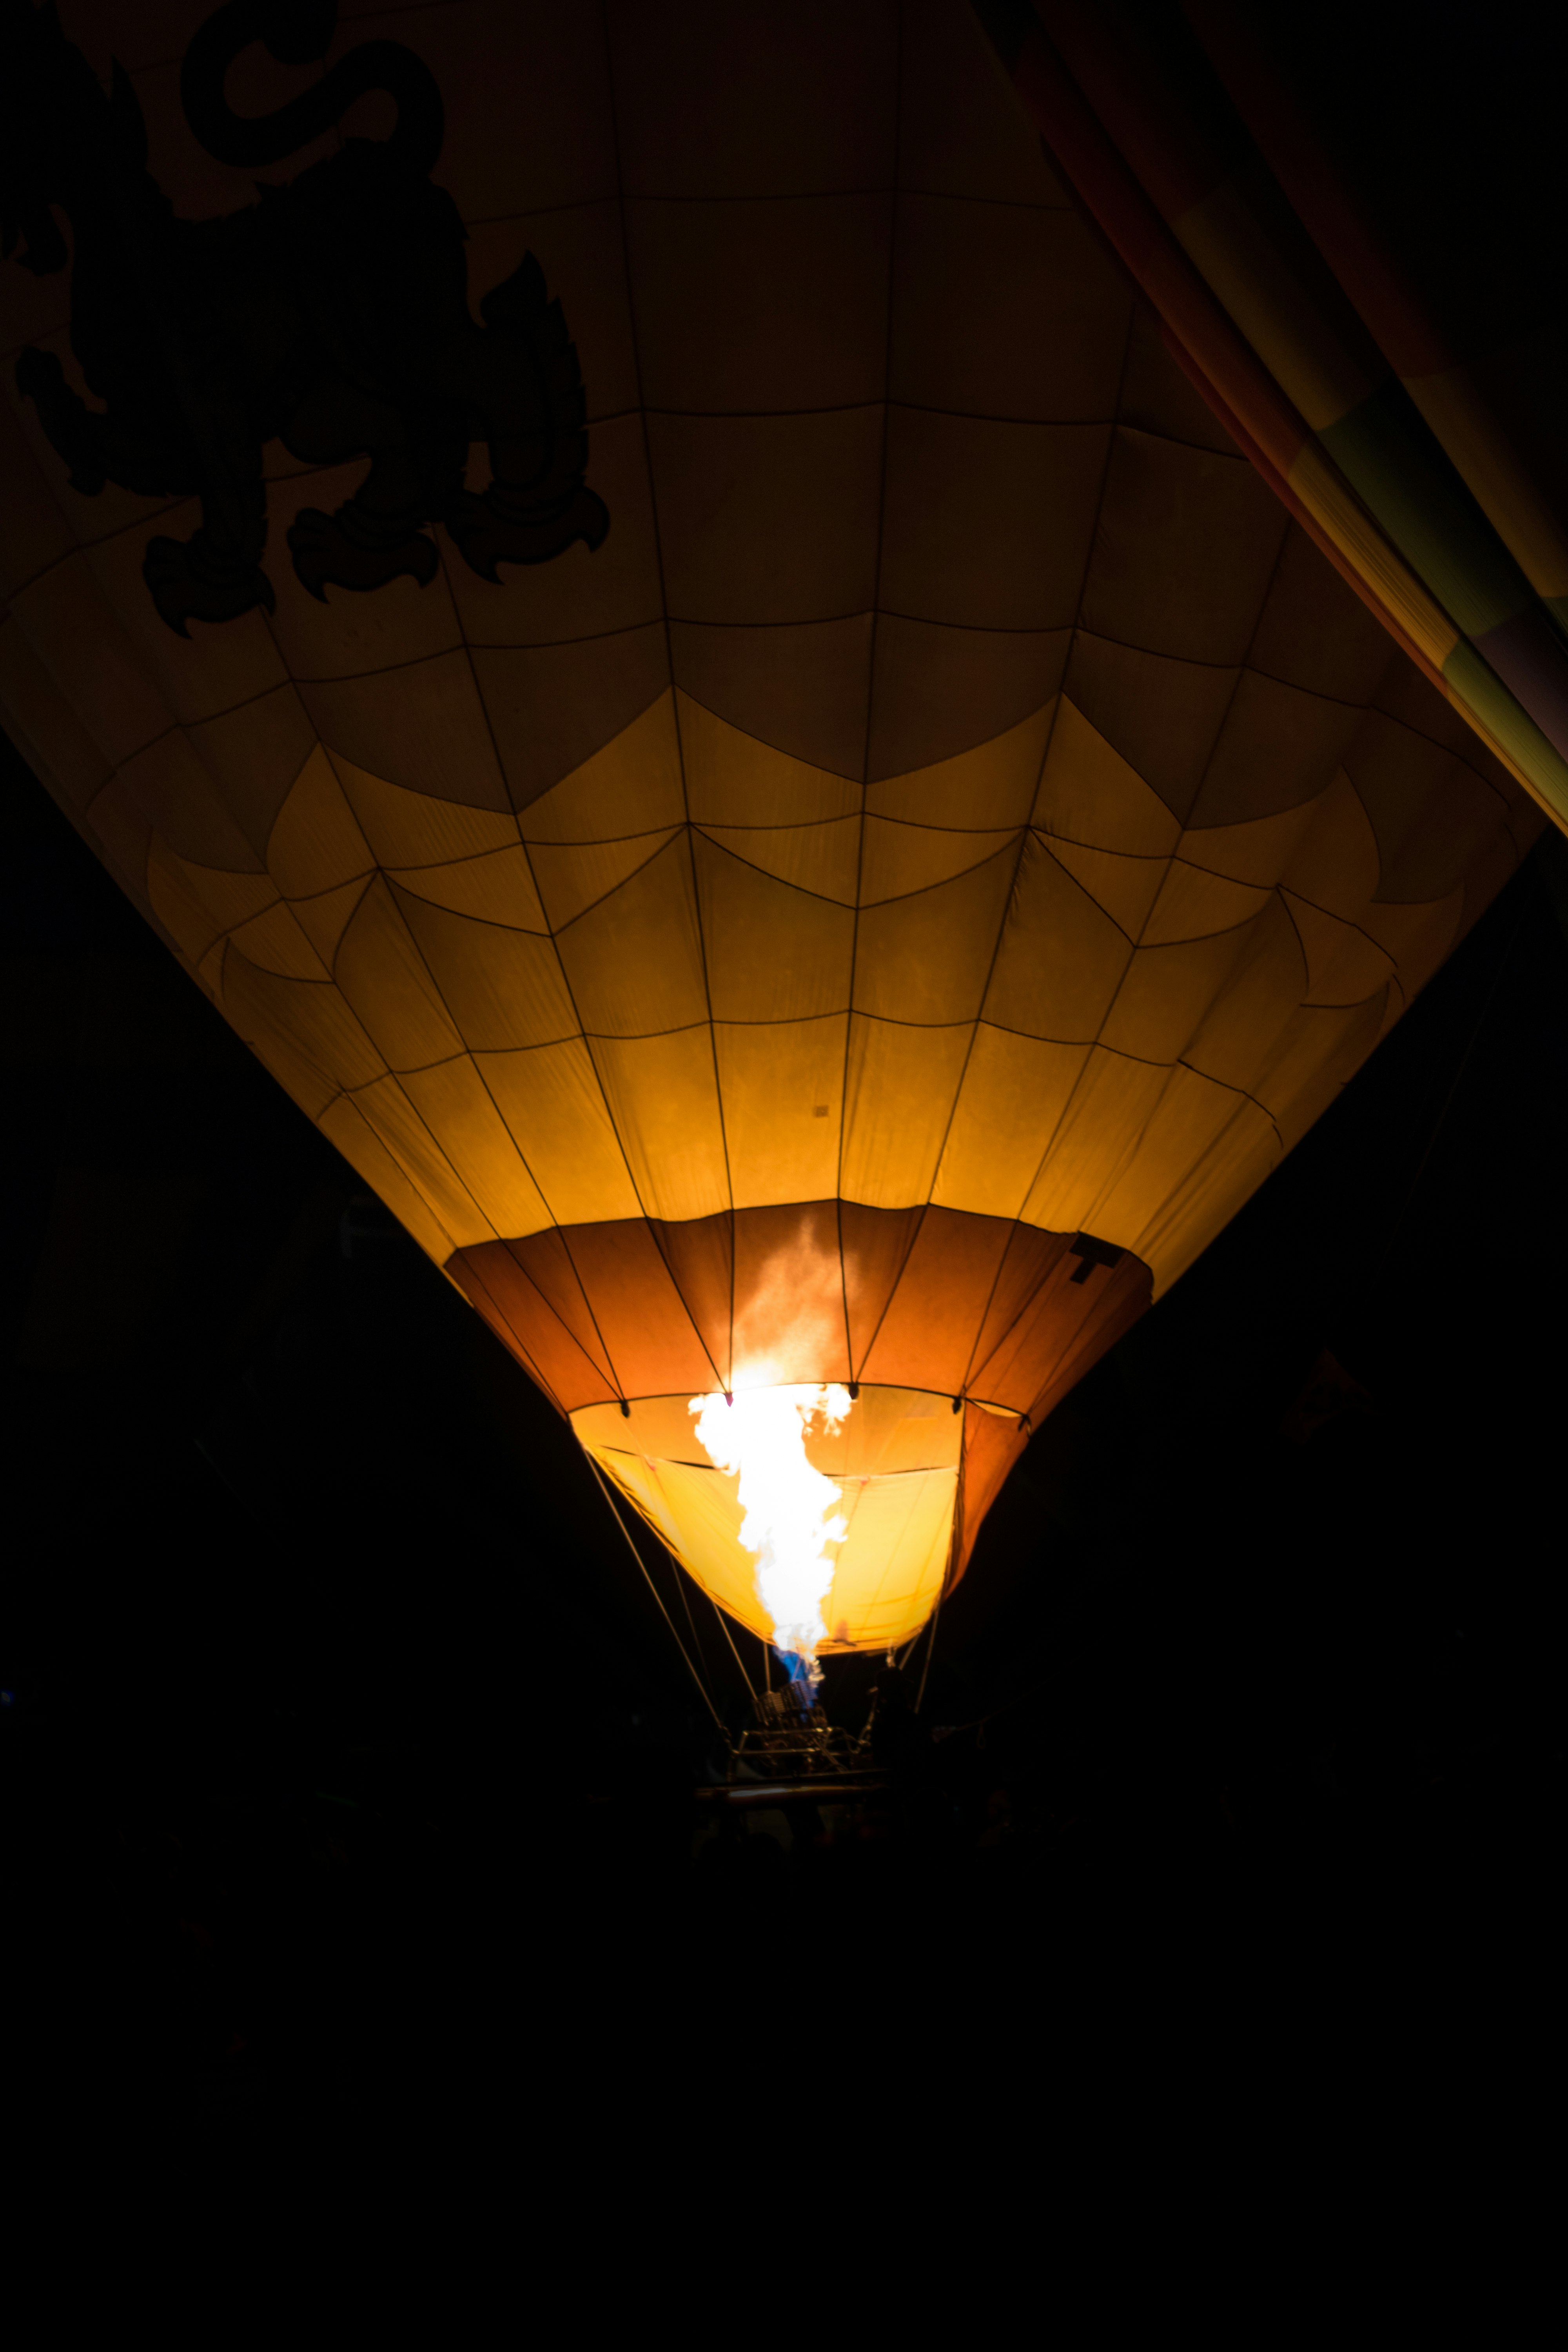 lighted hot air balloon during night time